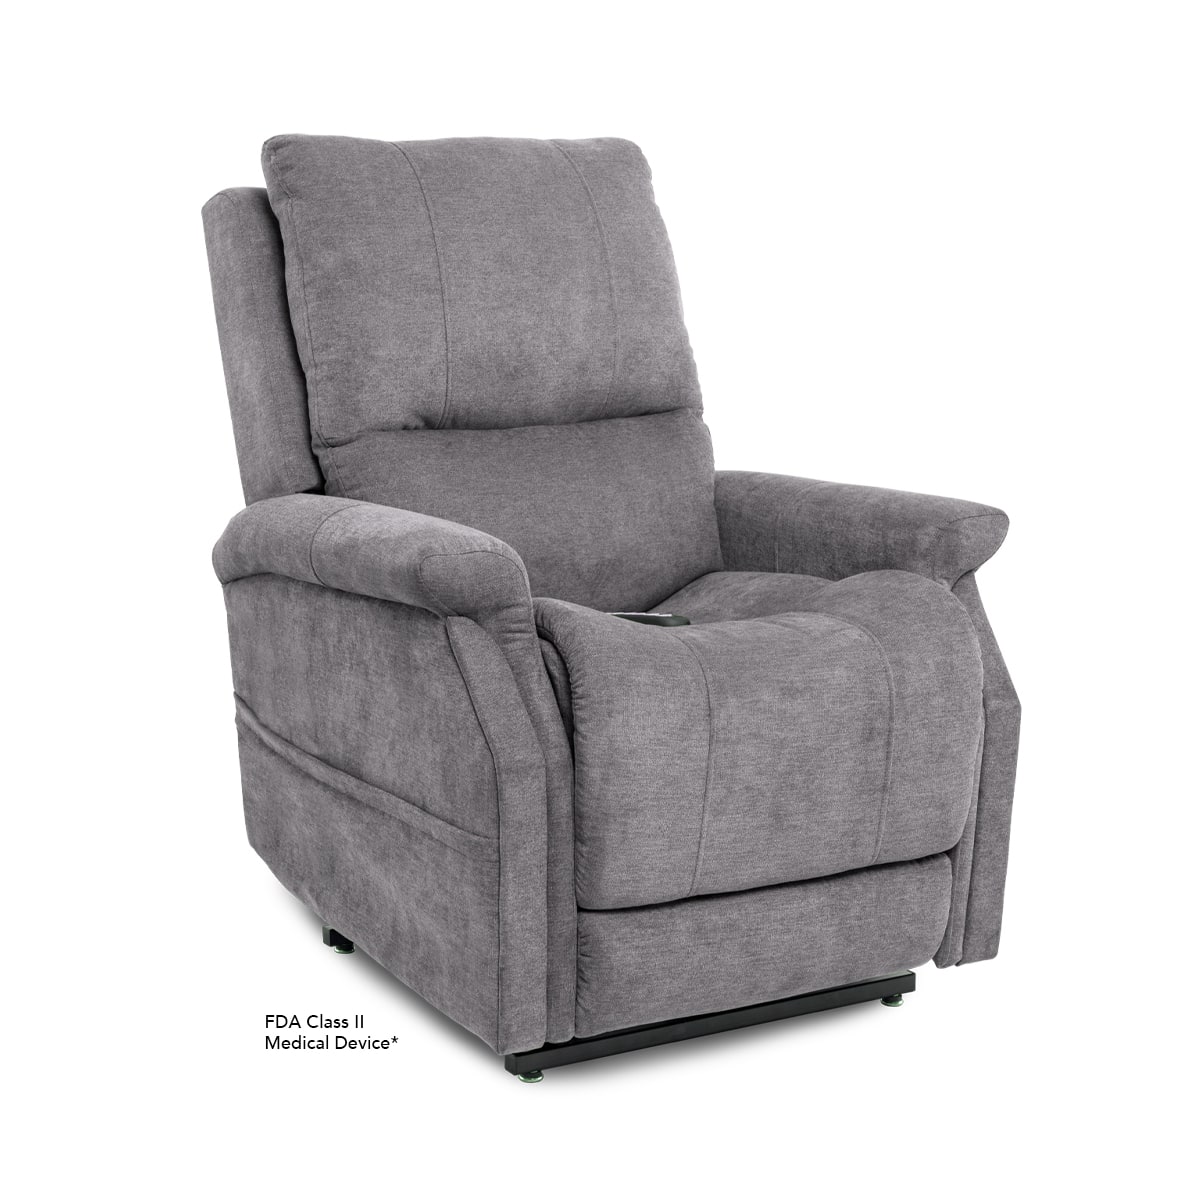 Pride VivaLift! Metro reclining lift chair in gray, upright position